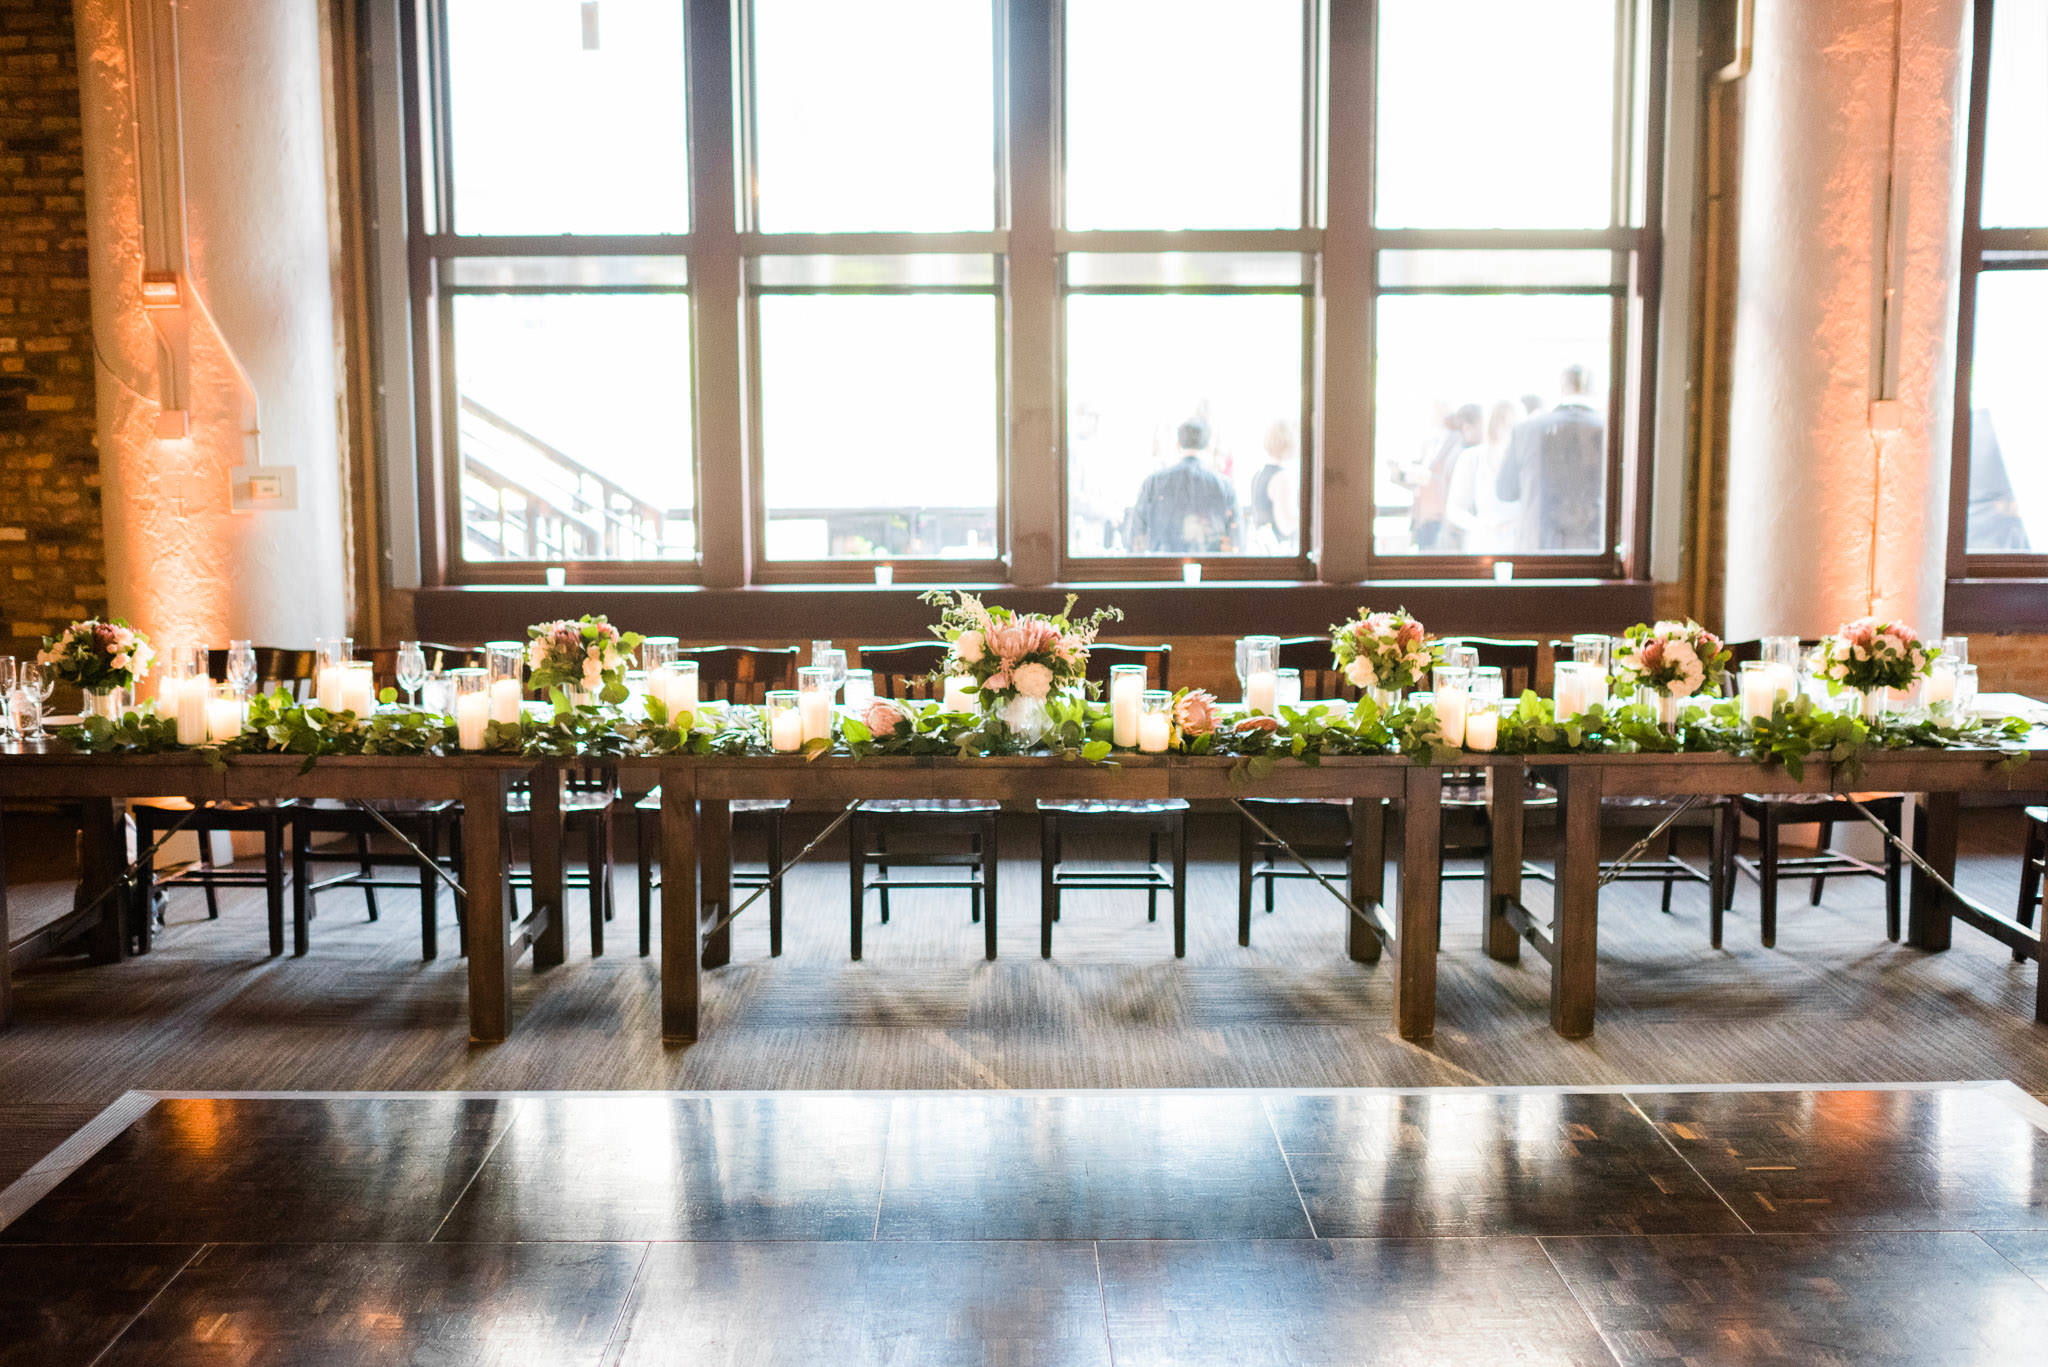 Wedding head table with garland and candles at River Roast in Chicago.